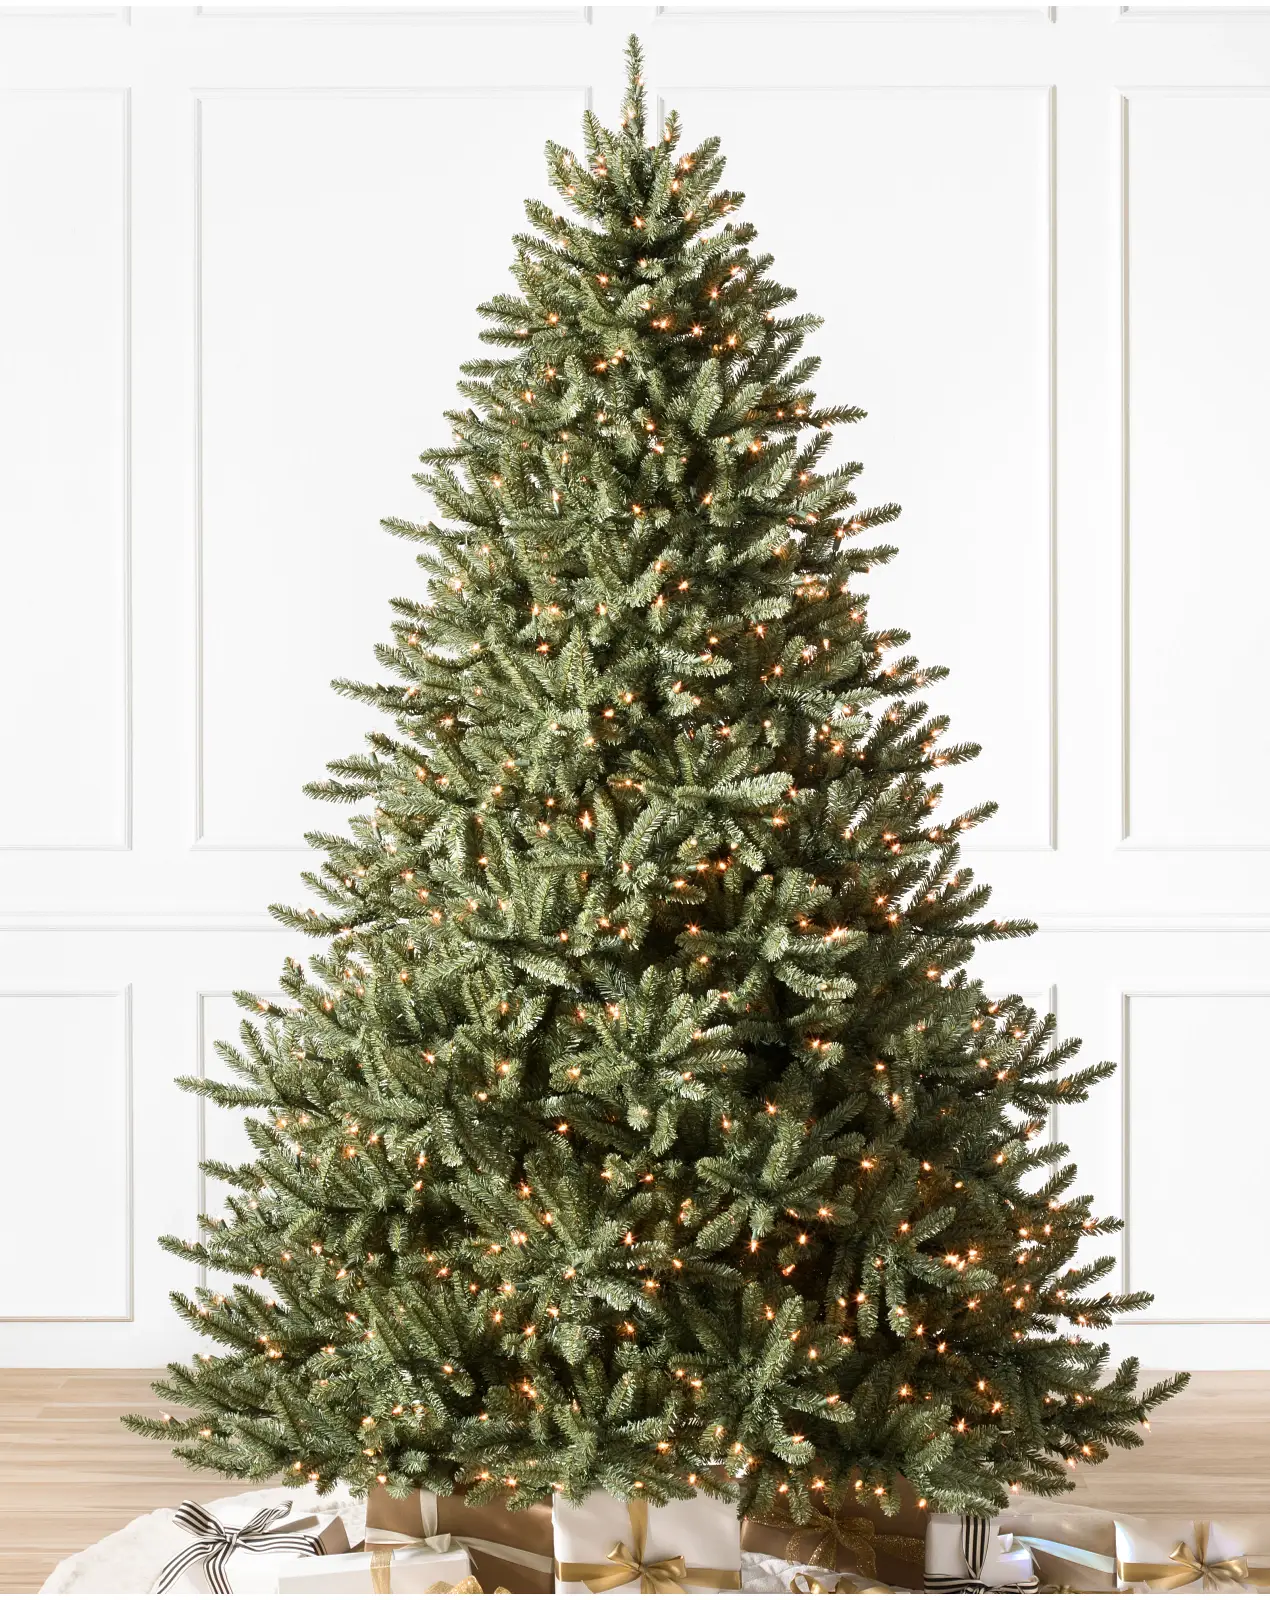 Canadian Blue Green Spruce Christmas Tree | Balsam Hill